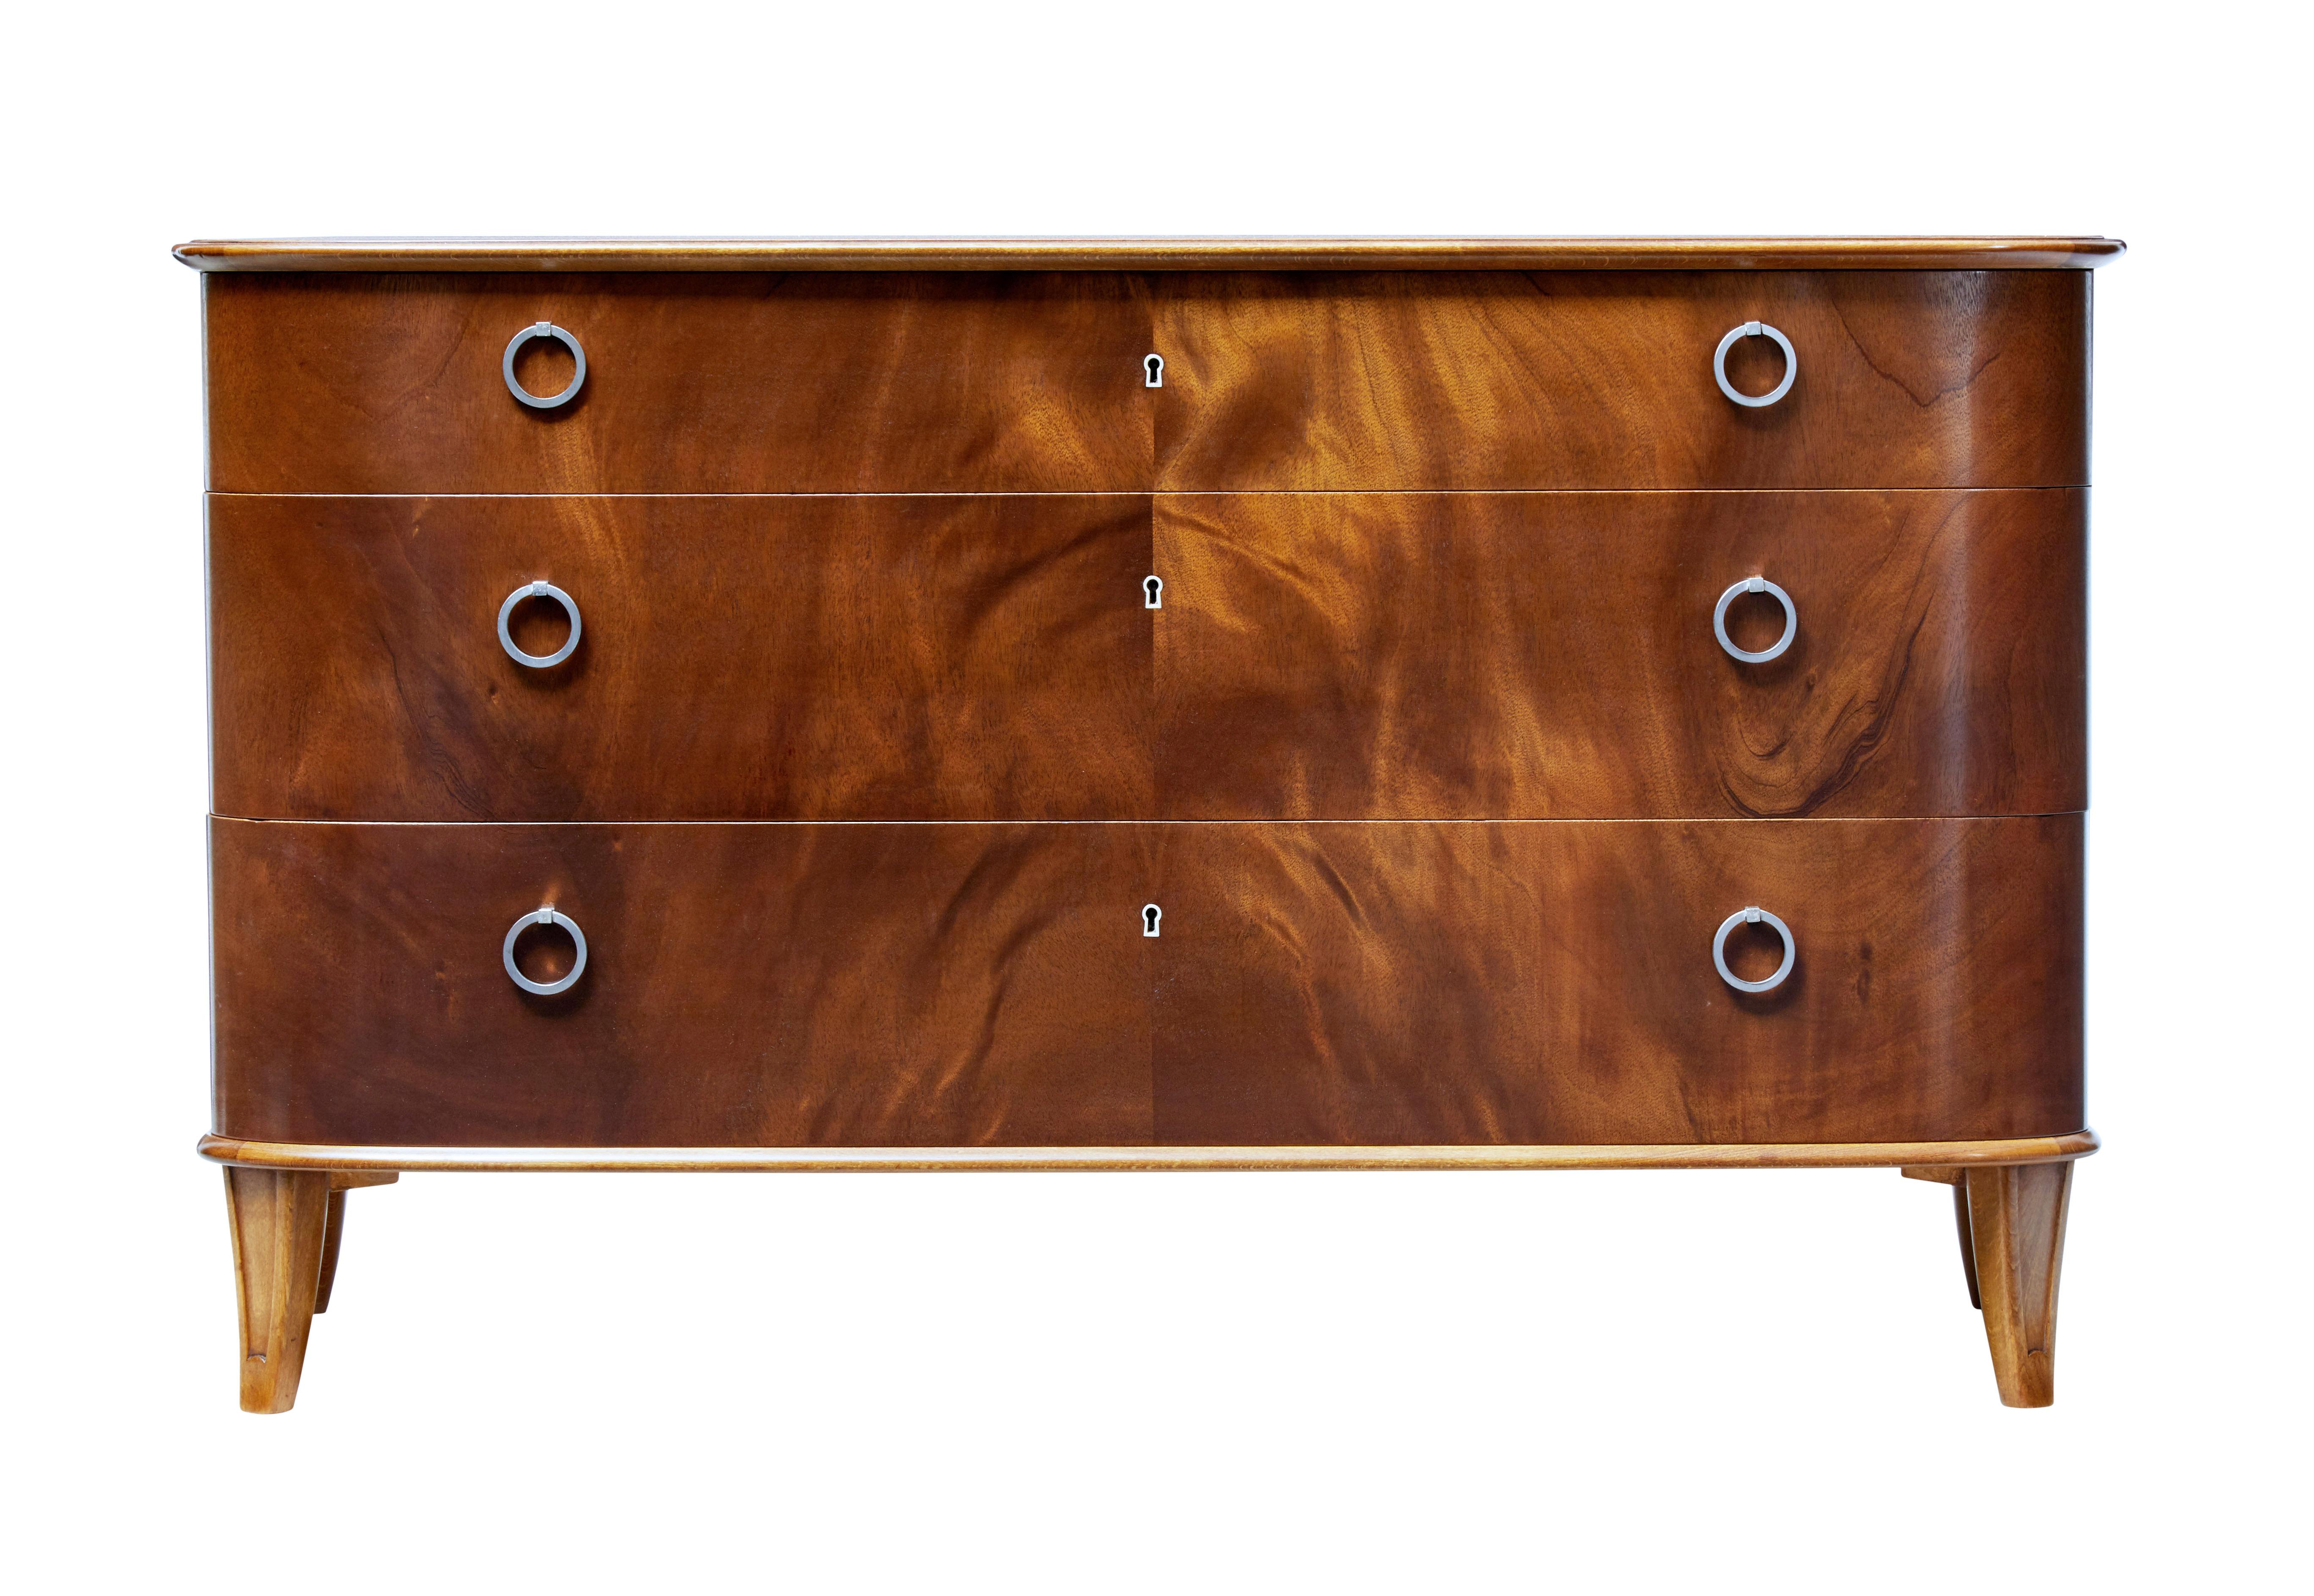 Fine quality shaped chest of drawers by Swedish retailers Svensk Mobelindustri, circa 1950.

Presented in excellent condition. Three graduating drawers with flame mahogany fronts. Fitted with steel ring handles.

Good rich color, standing on